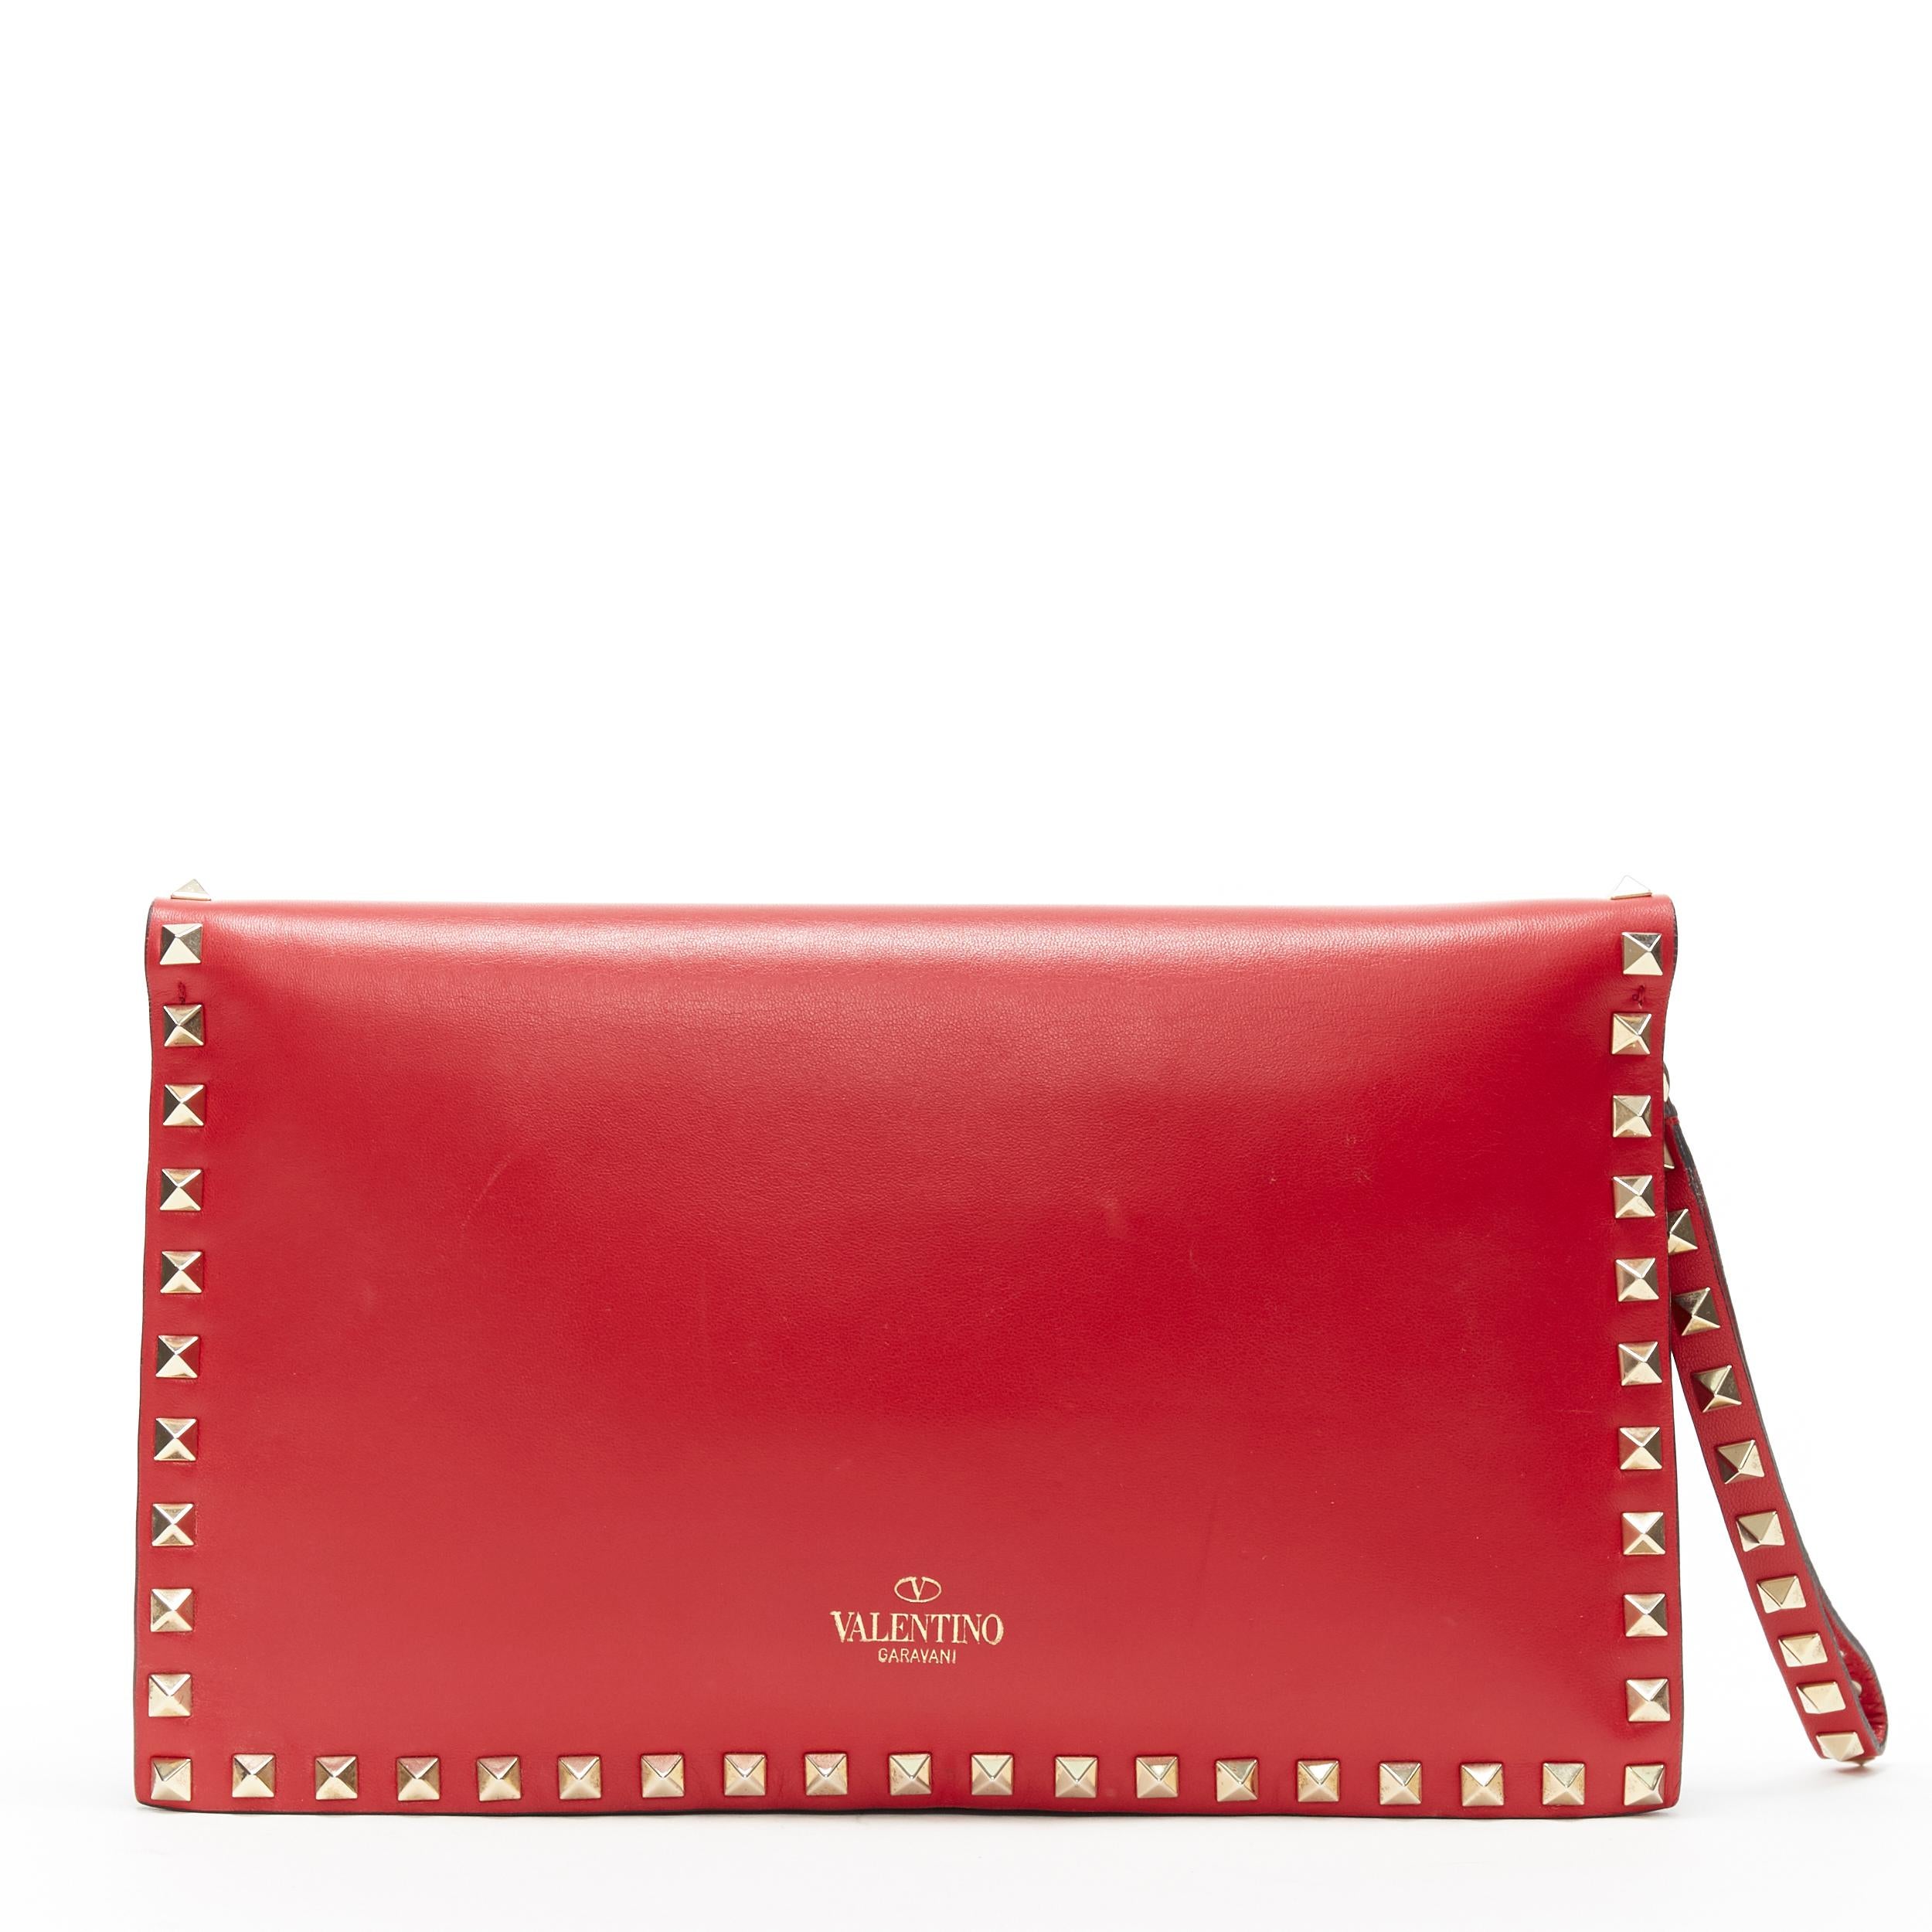 VALENTINO Rockstud red leather gold studded bordered wristlet flap clutch bag
Brand: Valentino
Model Name / Style: Rockstud clutch
Material: Leather
Color: Red
Pattern: Solid
Closure: Magnetic
Extra Detail: Detachable studded wristlet strap. Beige